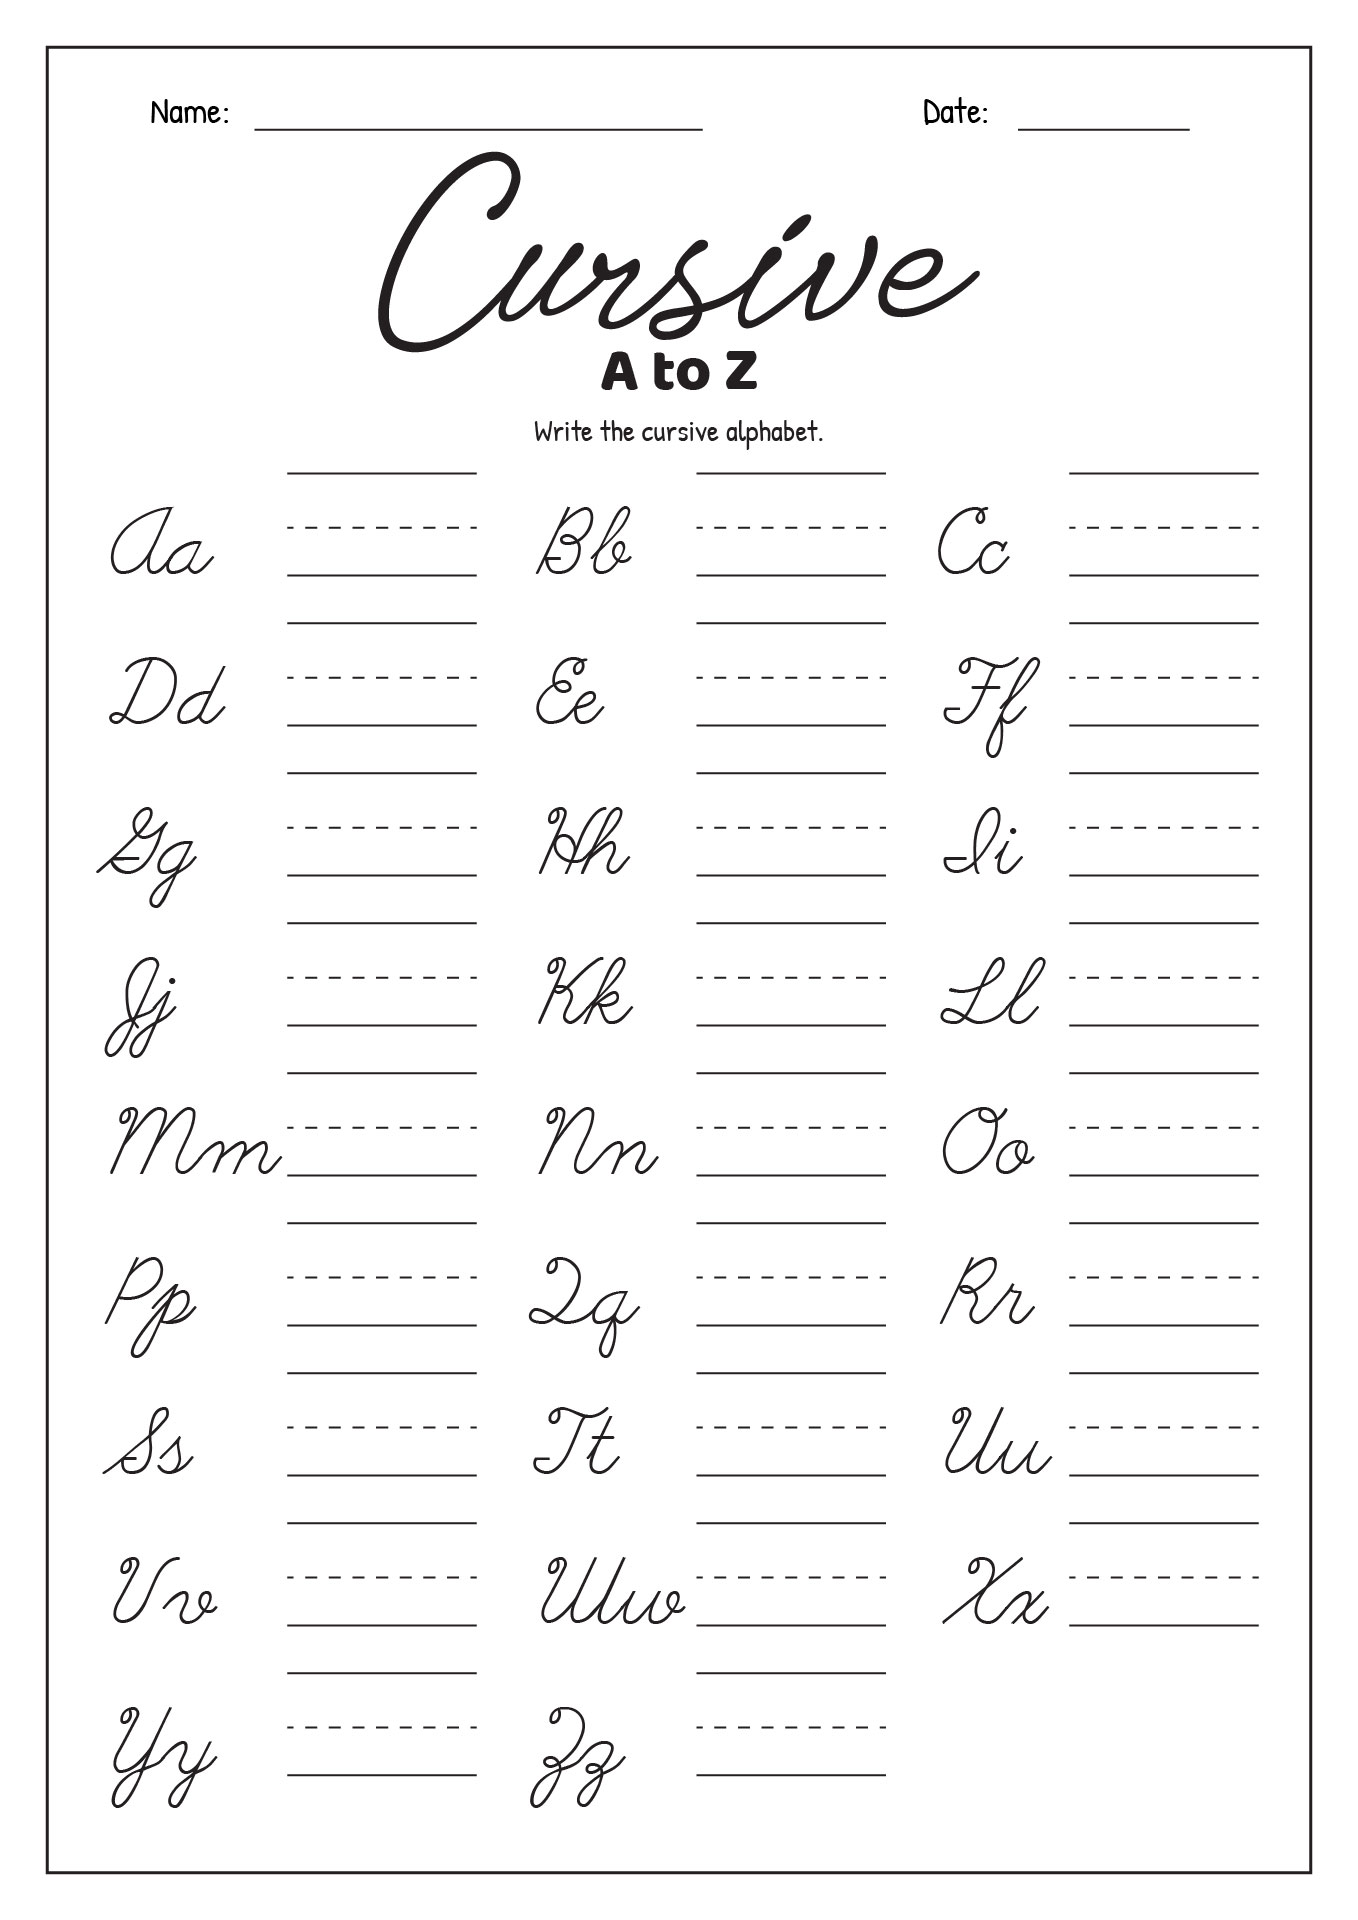 A to Z Cursive Writing Practice Sheets 5th Grade